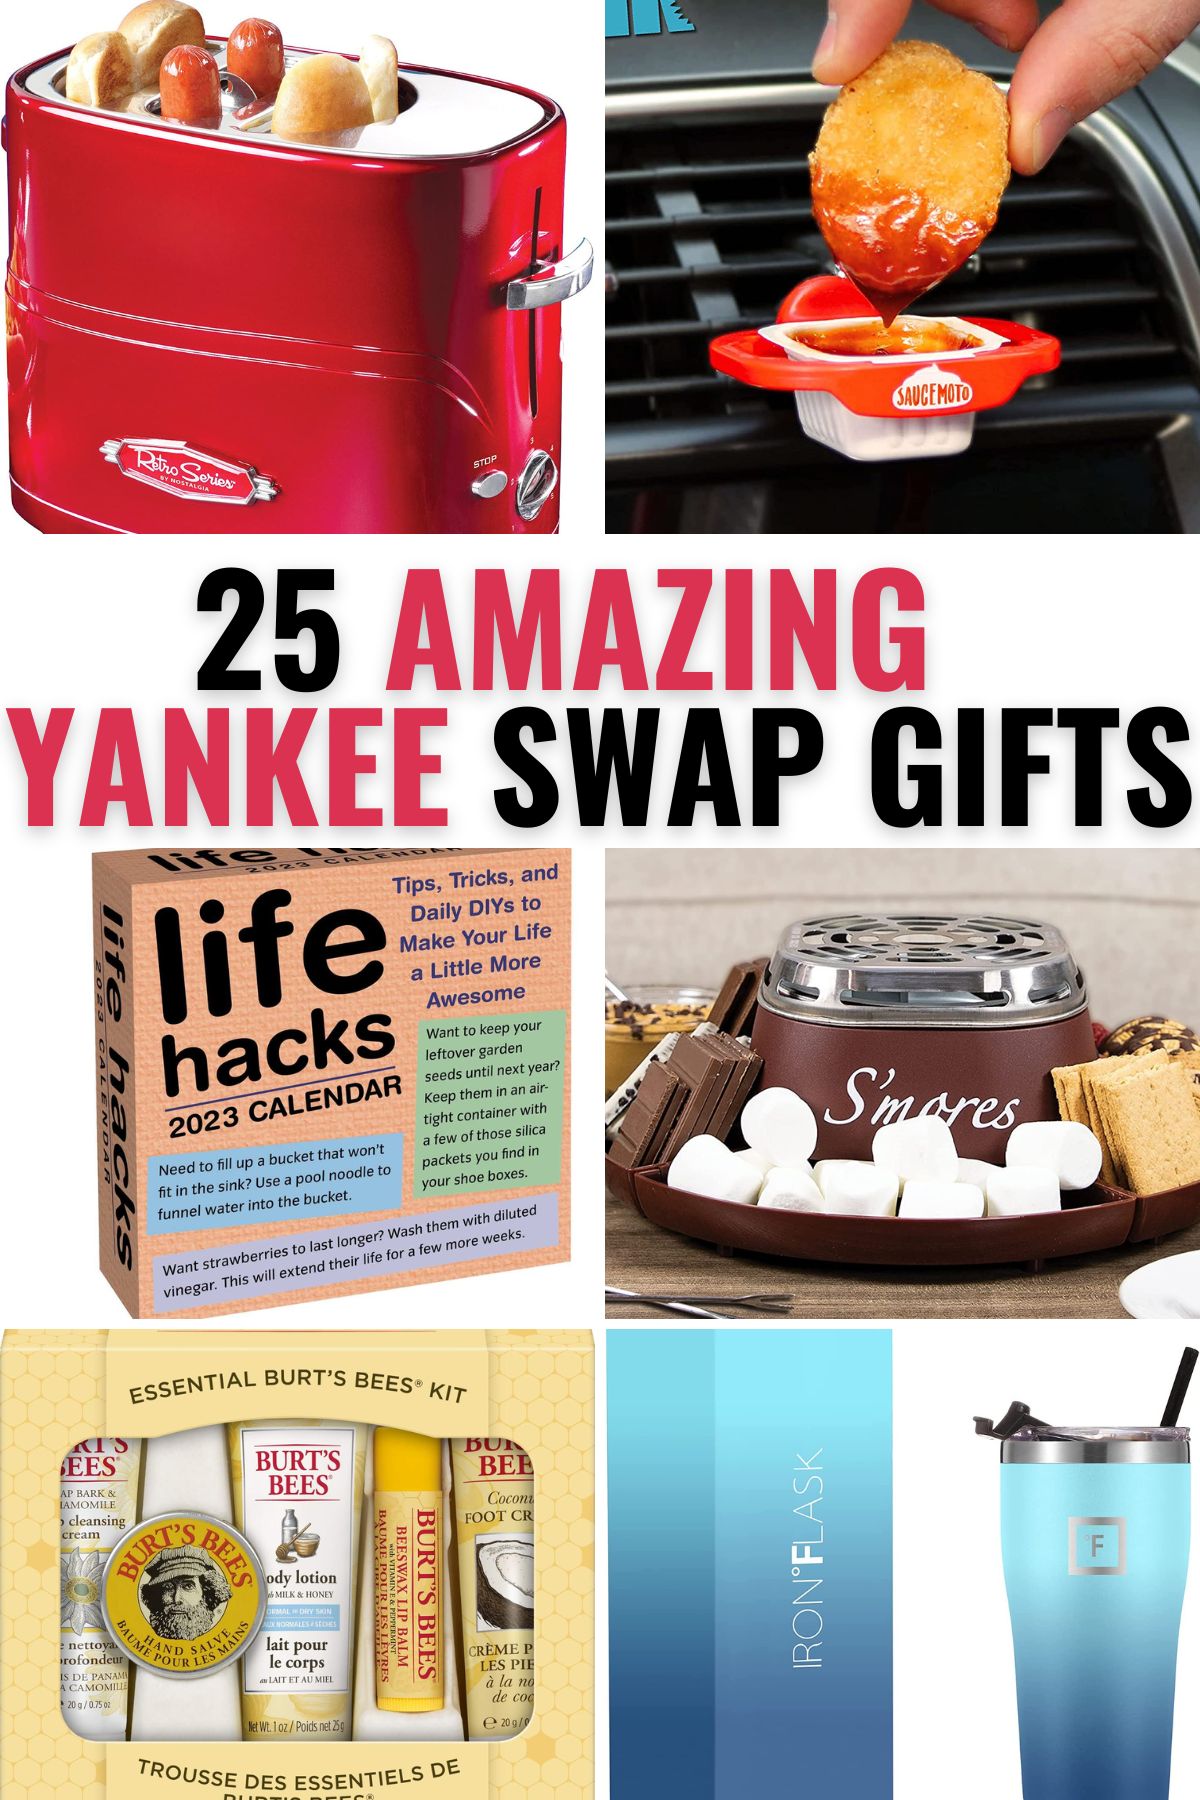 35 Best Yankee Swap Gift Ideas for 2022 - Parade